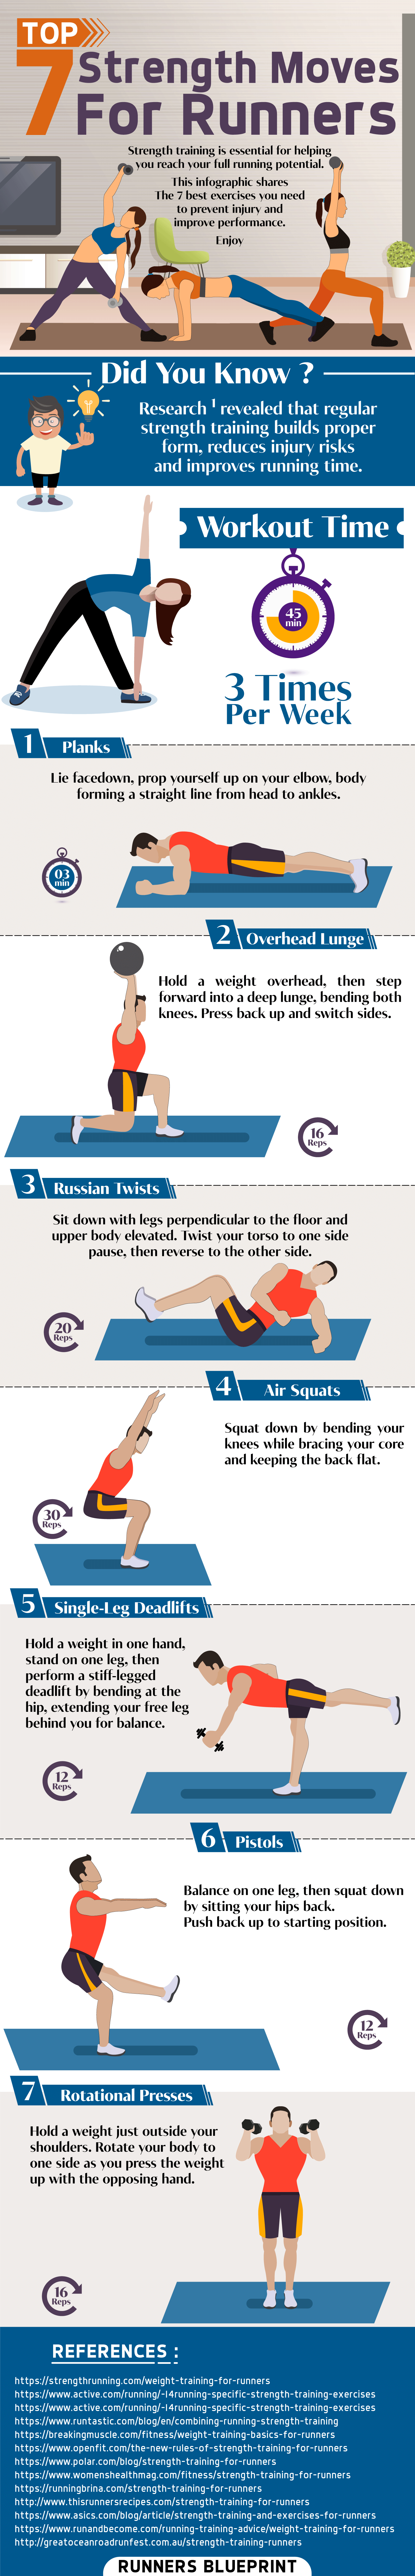 Top 7 Strength Moves For Runners Infographic — Runners Blueprint